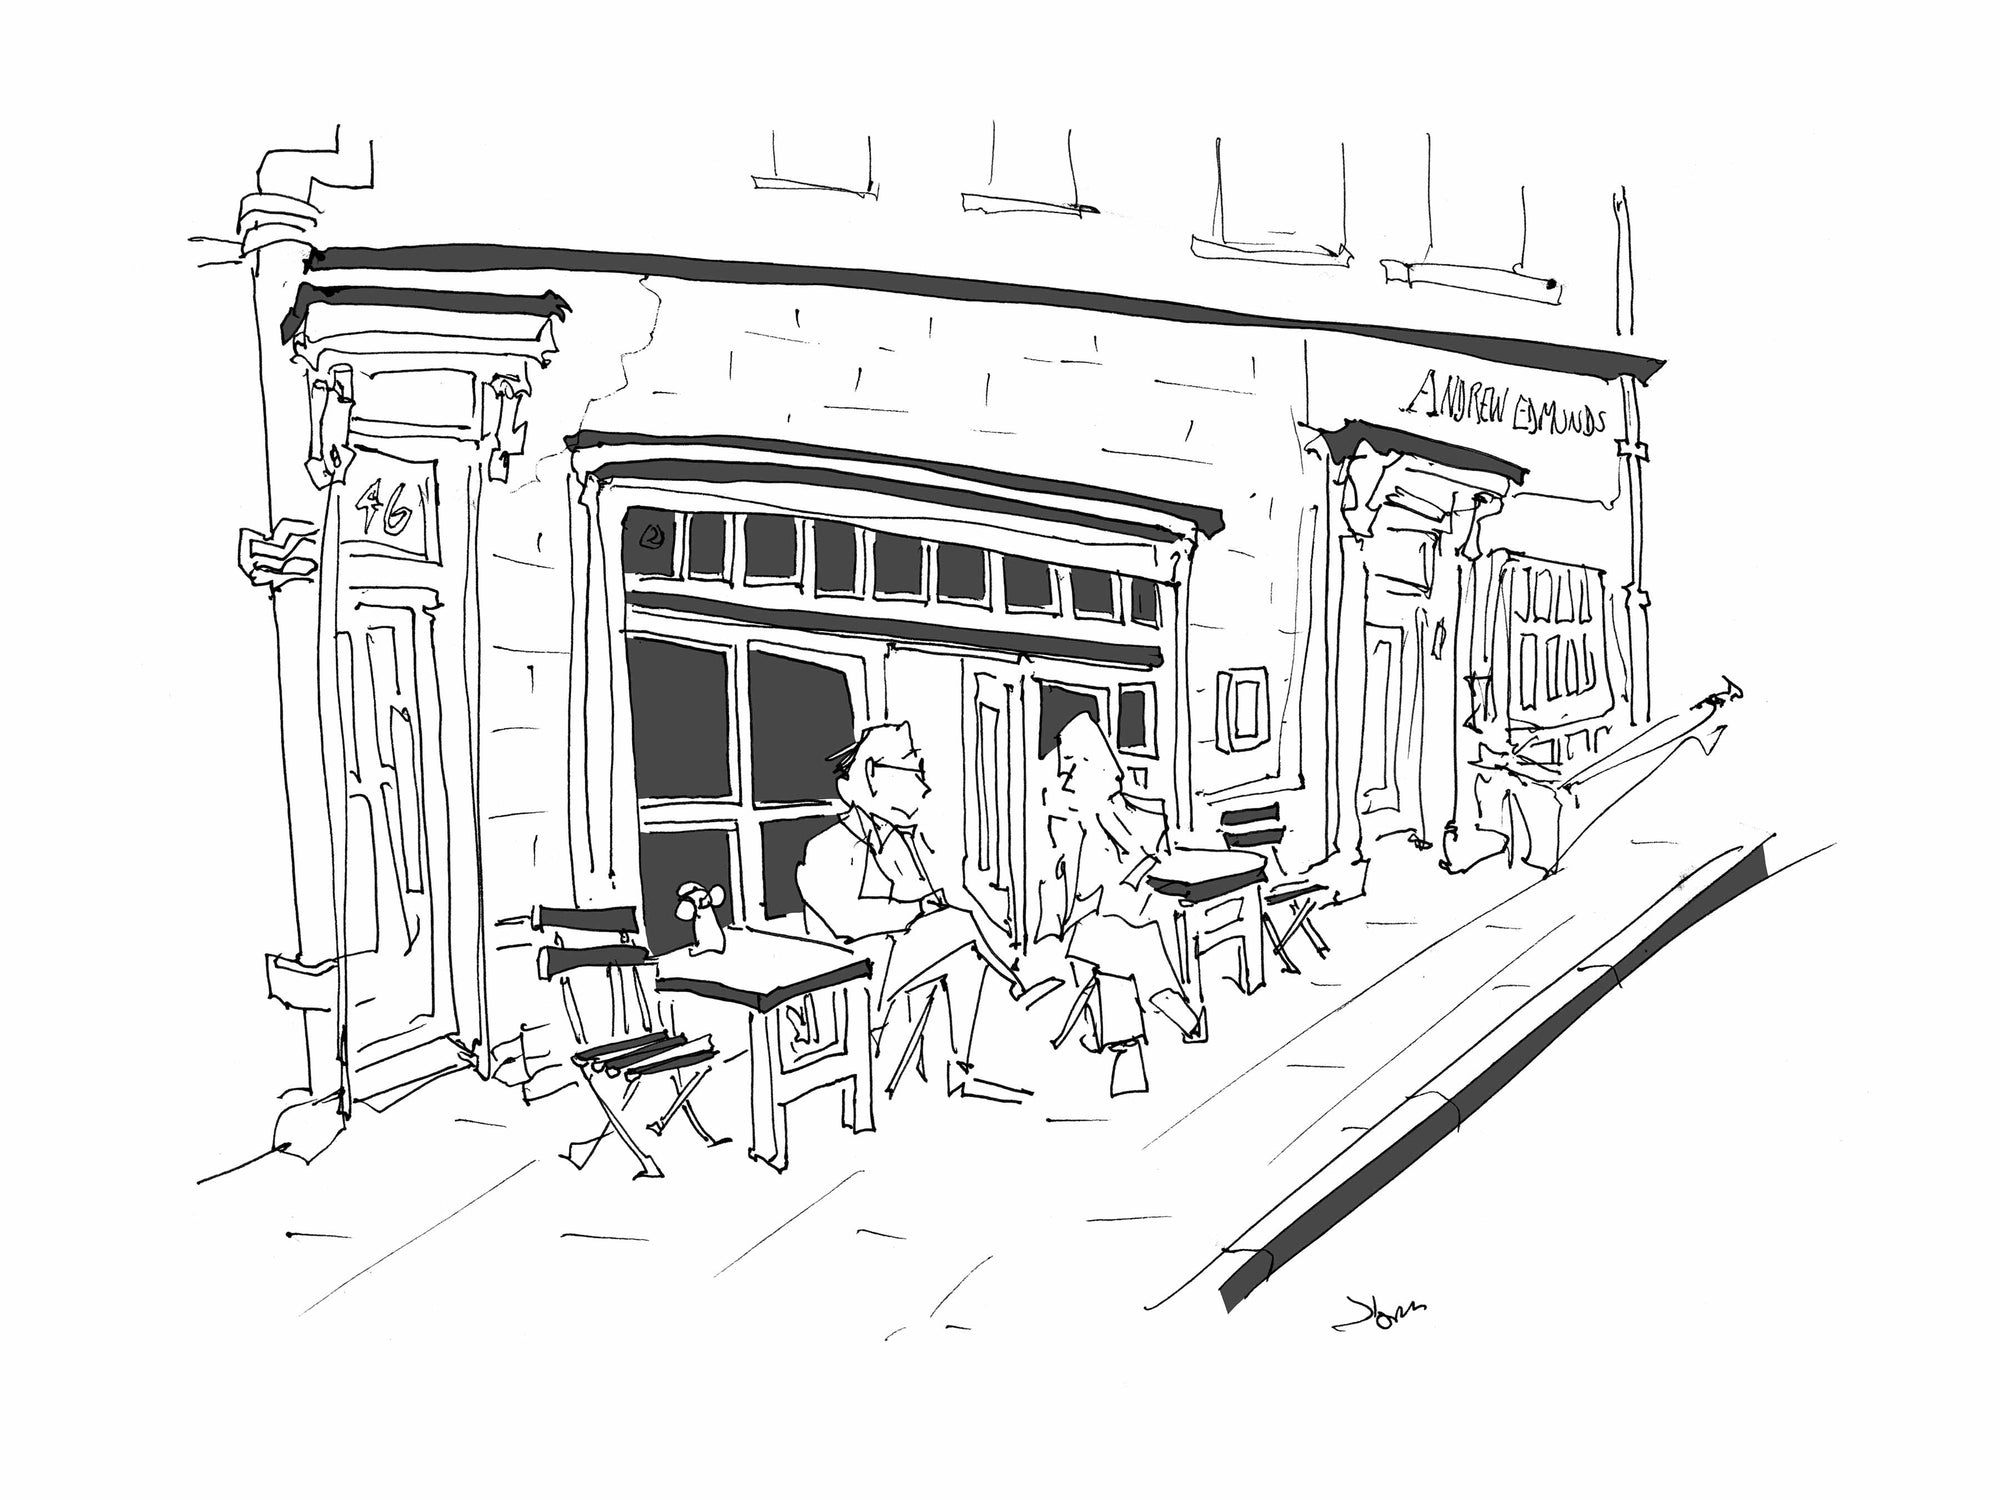 Artist trying to sketch every restaurant in New York City